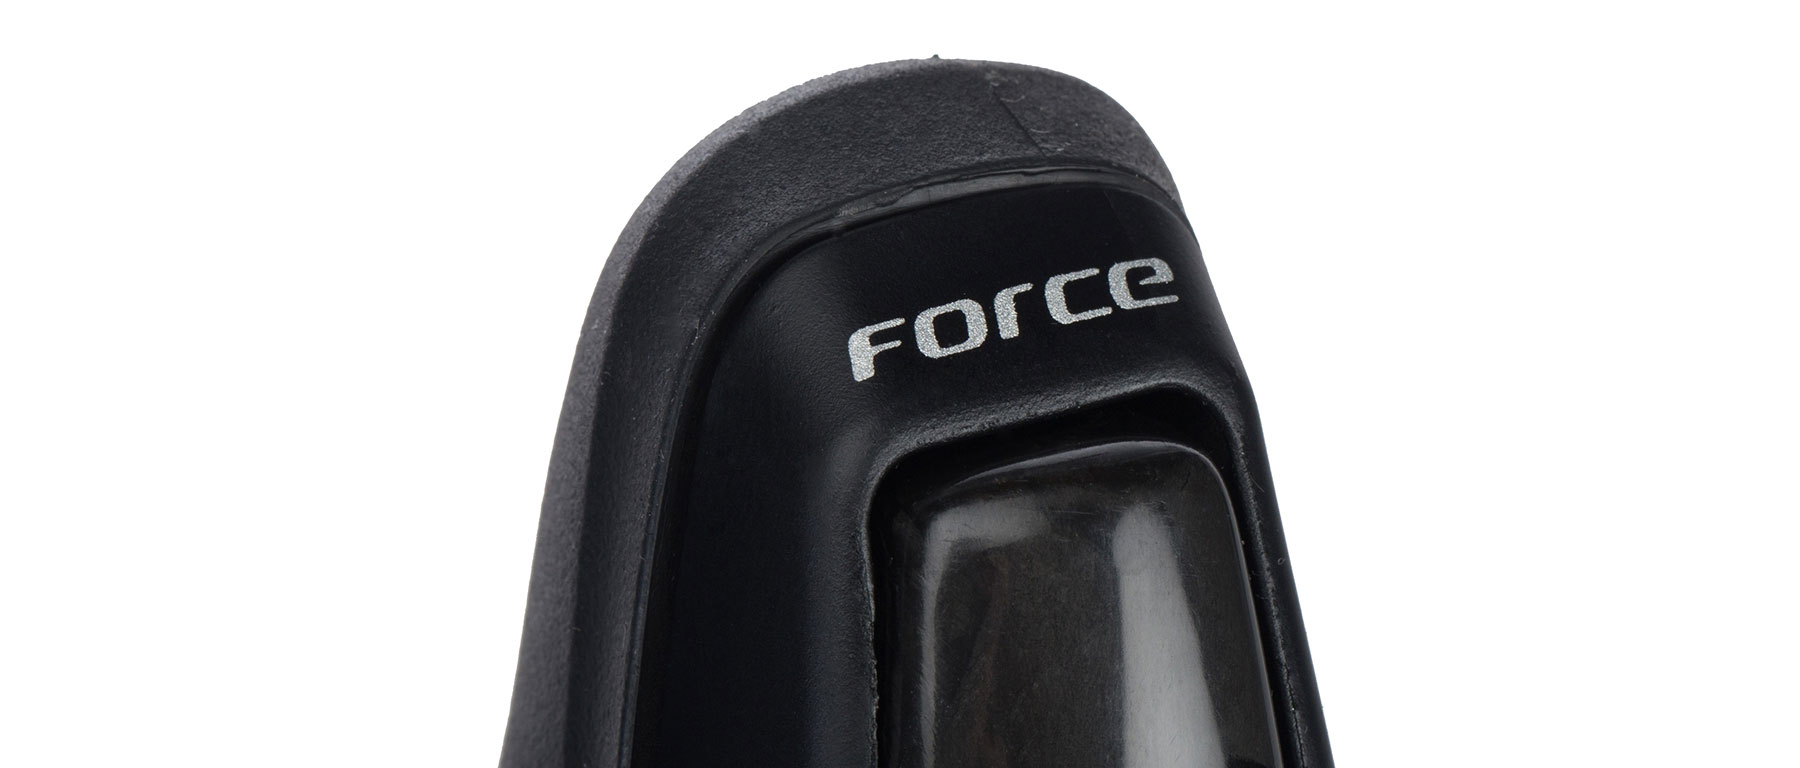 SRAM Force 22 11-Speed Shifters